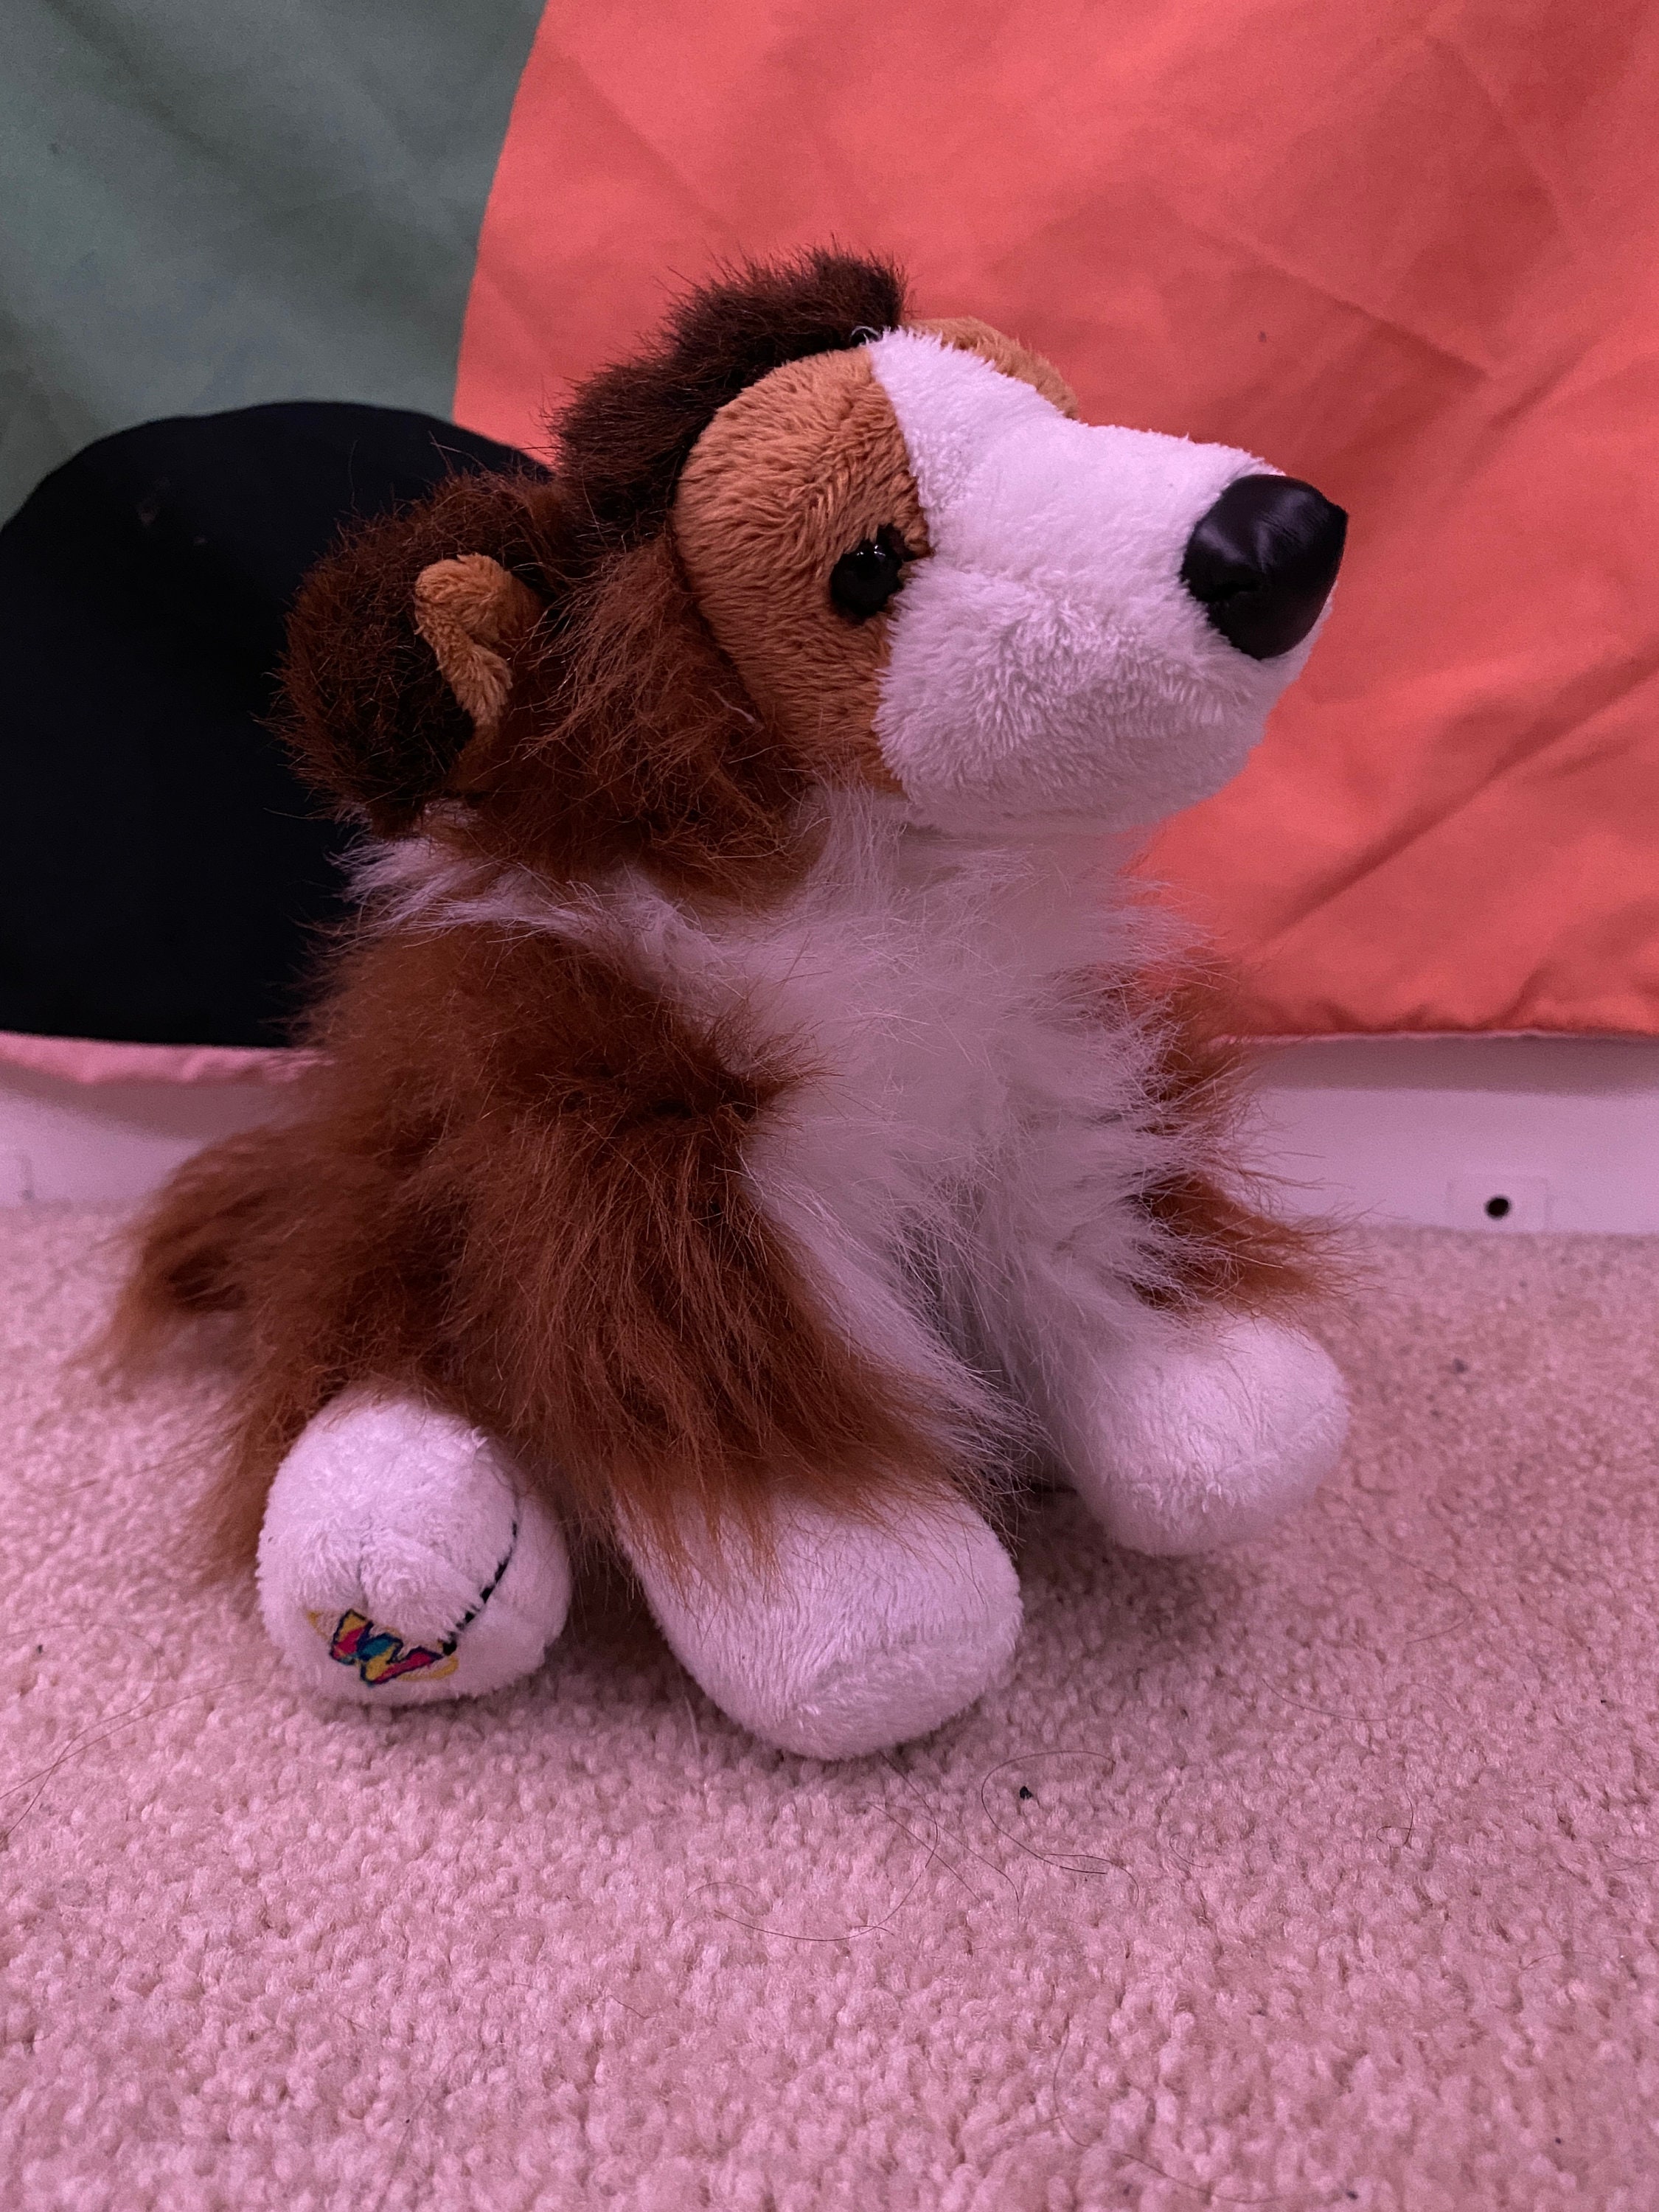 Cuddle Puppies Border Collie Plush Soft Toy Dog 22cm Stuffed Animal by Keel  Toys